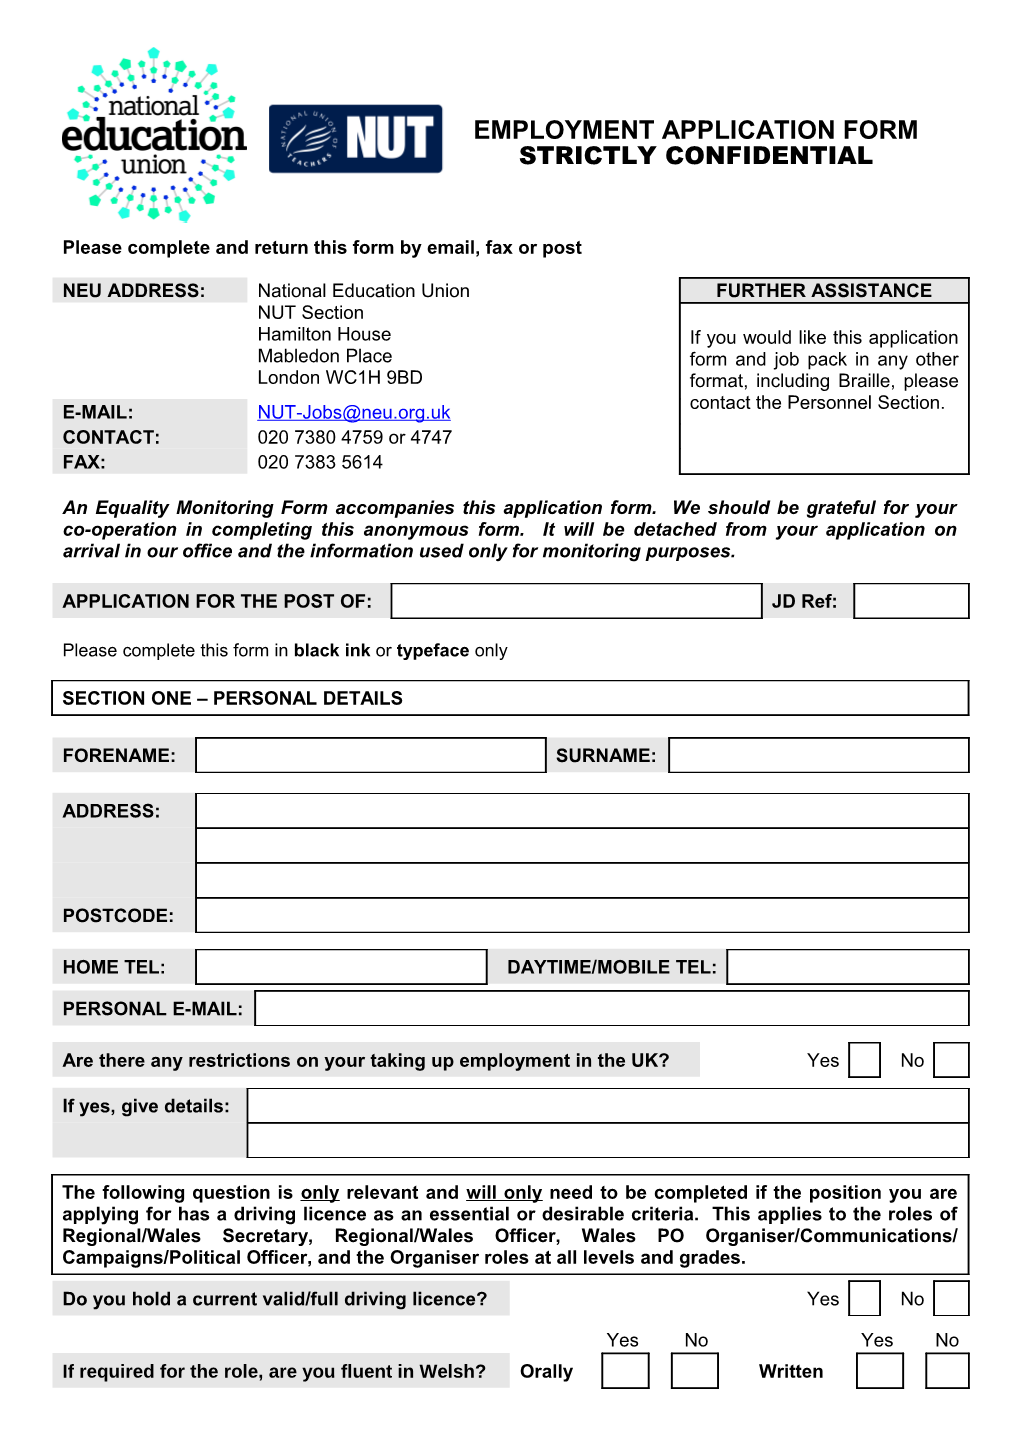 Please Complete and Return This Form by Email, Fax Or Post